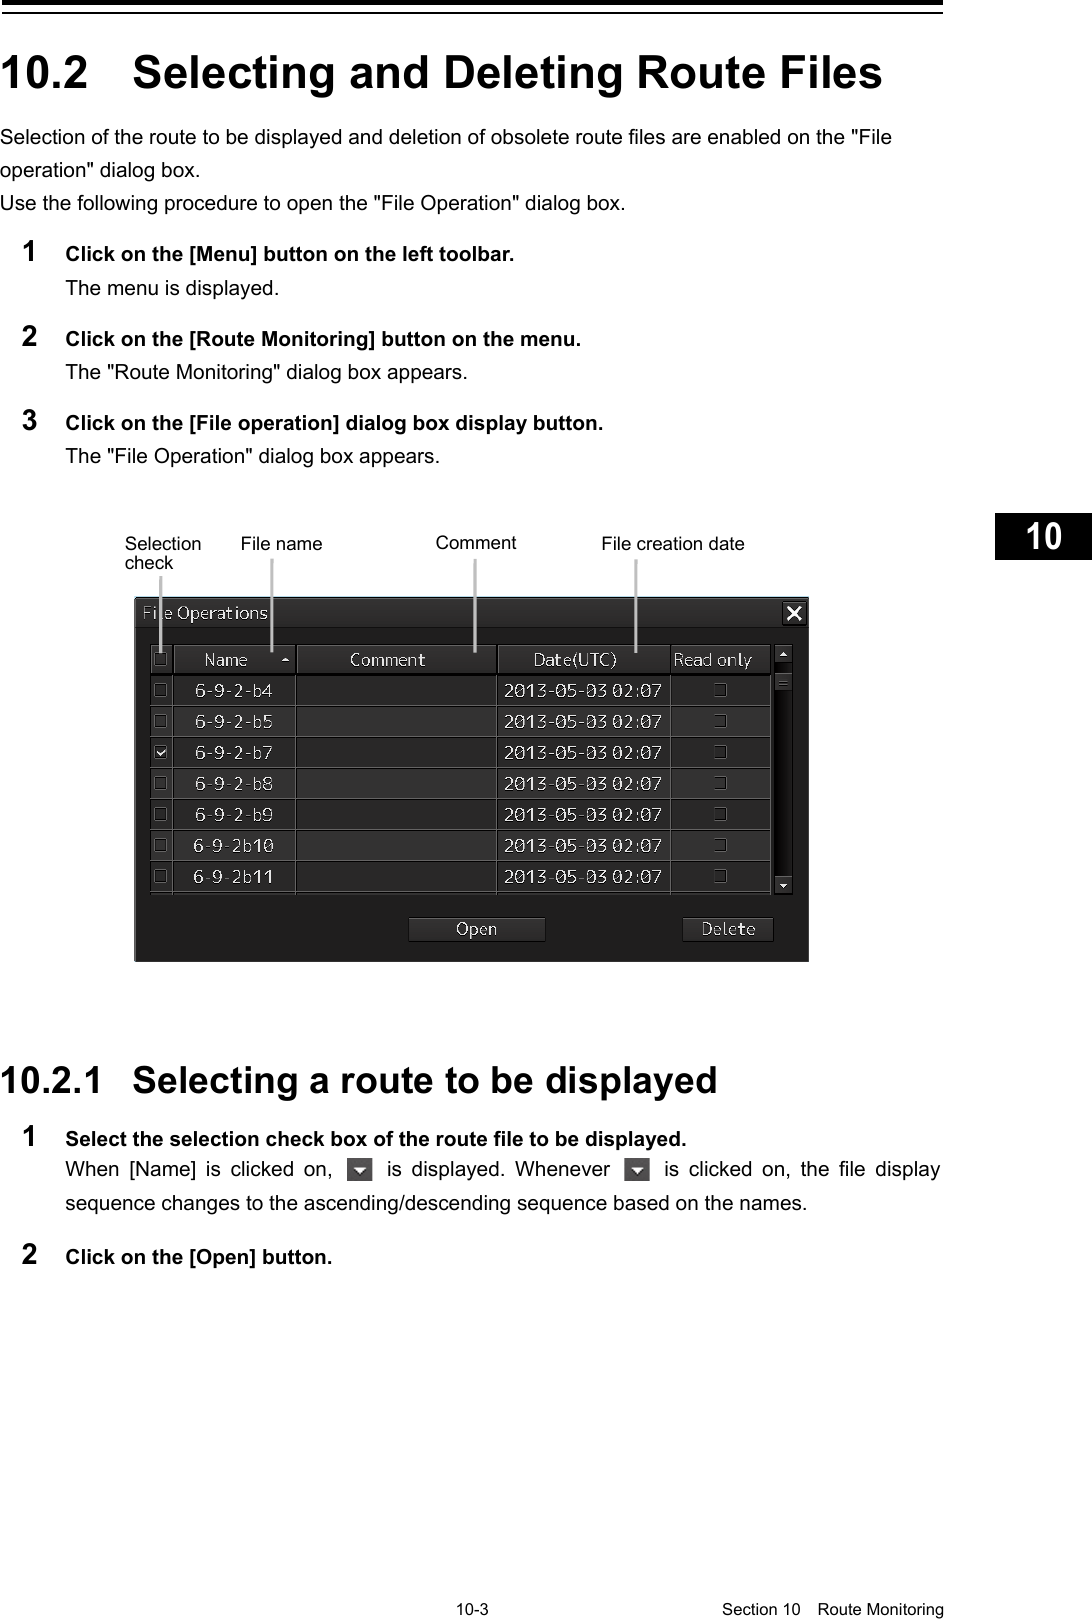     10-3  Section 10  Route Monitoring    1  2  3  4  5  6  7  8  9  10  11  12  13  14  15  16  17  18  19  20  21  22  23  24  25  26  27      10.2  Selecting and Deleting Route Files Selection of the route to be displayed and deletion of obsolete route files are enabled on the &quot;File operation&quot; dialog box. Use the following procedure to open the &quot;File Operation&quot; dialog box. 1  Click on the [Menu] button on the left toolbar. The menu is displayed. 2  Click on the [Route Monitoring] button on the menu. The &quot;Route Monitoring&quot; dialog box appears. 3  Click on the [File operation] dialog box display button. The &quot;File Operation&quot; dialog box appears.     10.2.1 Selecting a route to be displayed 1  Select the selection check box of the route file to be displayed. When  [Name] is clicked on,   is displayed. Whenever   is clicked on, the file display sequence changes to the ascending/descending sequence based on the names. 2  Click on the [Open] button.   Selection check File name Comment File creation date 